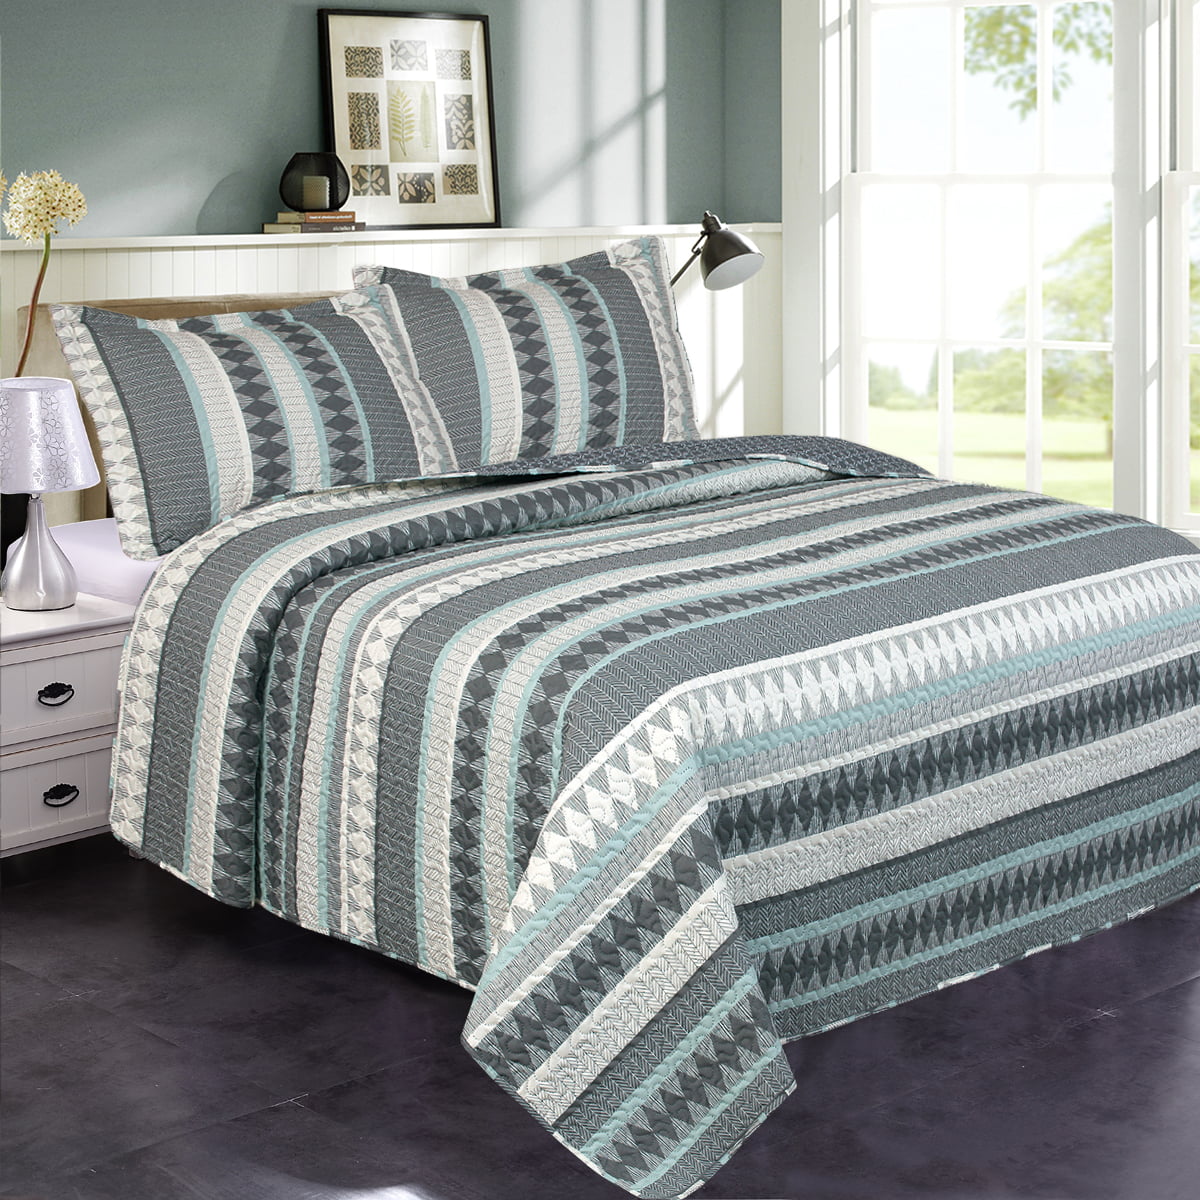 Details about  / Gray Grey Black Embossed 3 pc Quilt Set Coverlet Twin Full Queen King Bedding